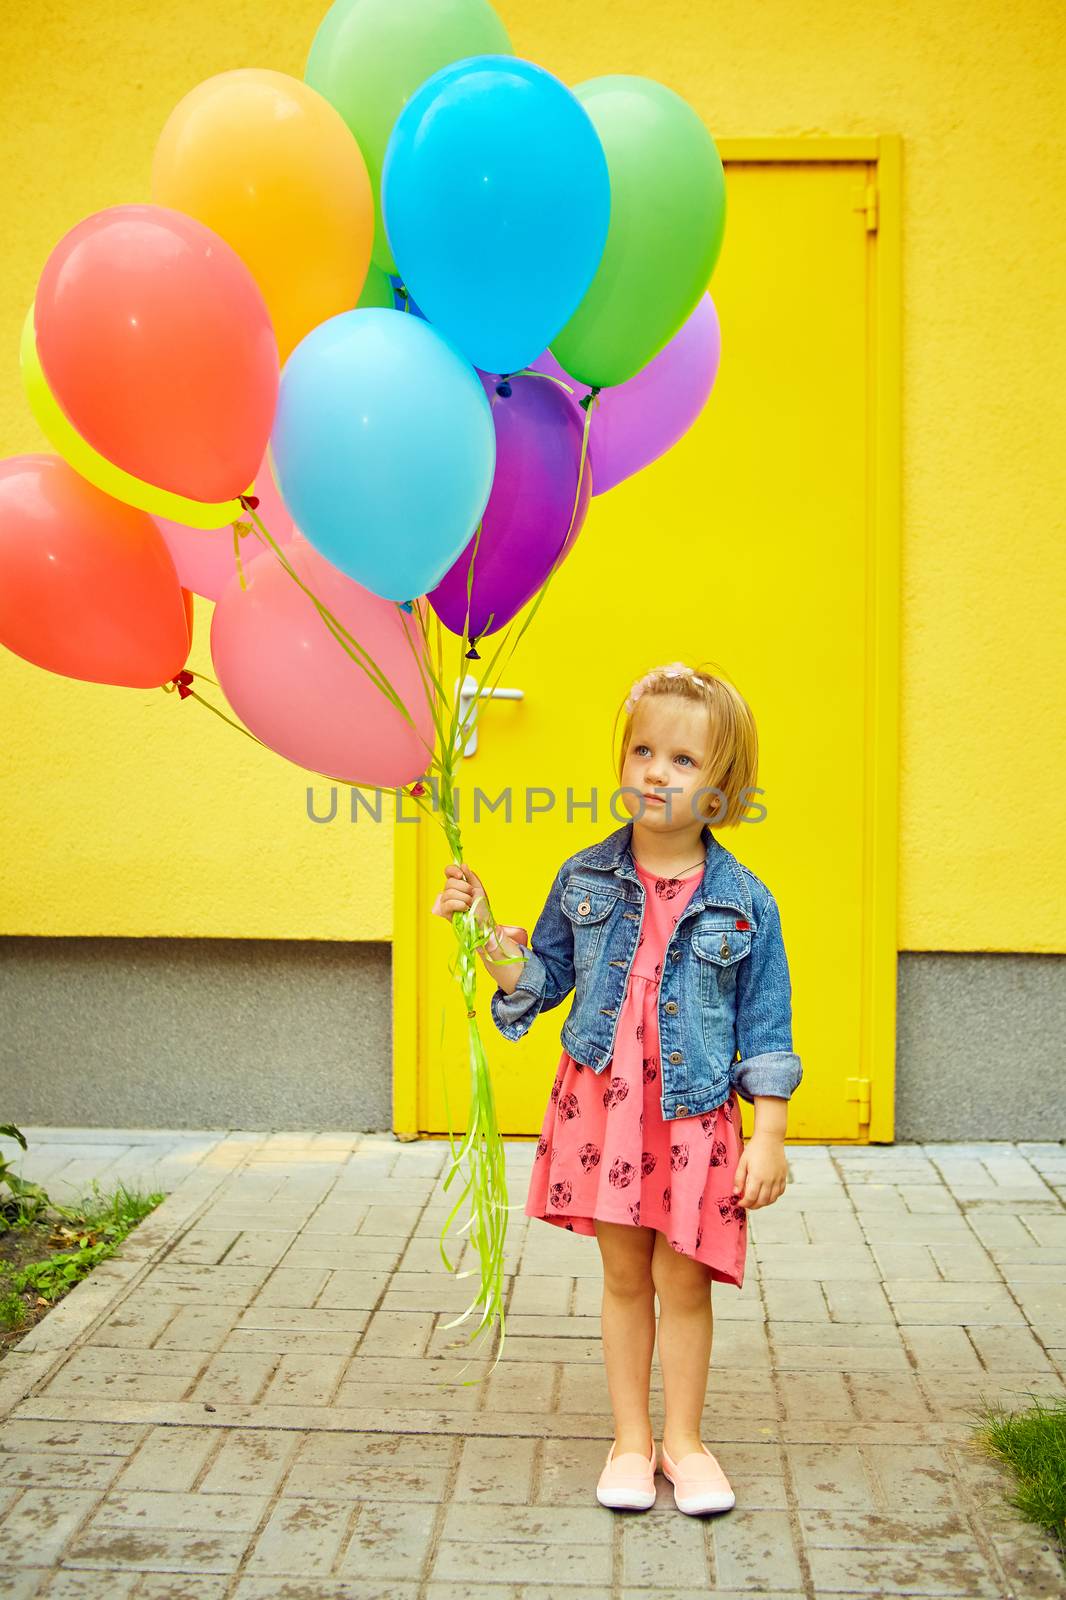 inspiration, happy little girl outdoors with balloons on a yellow background